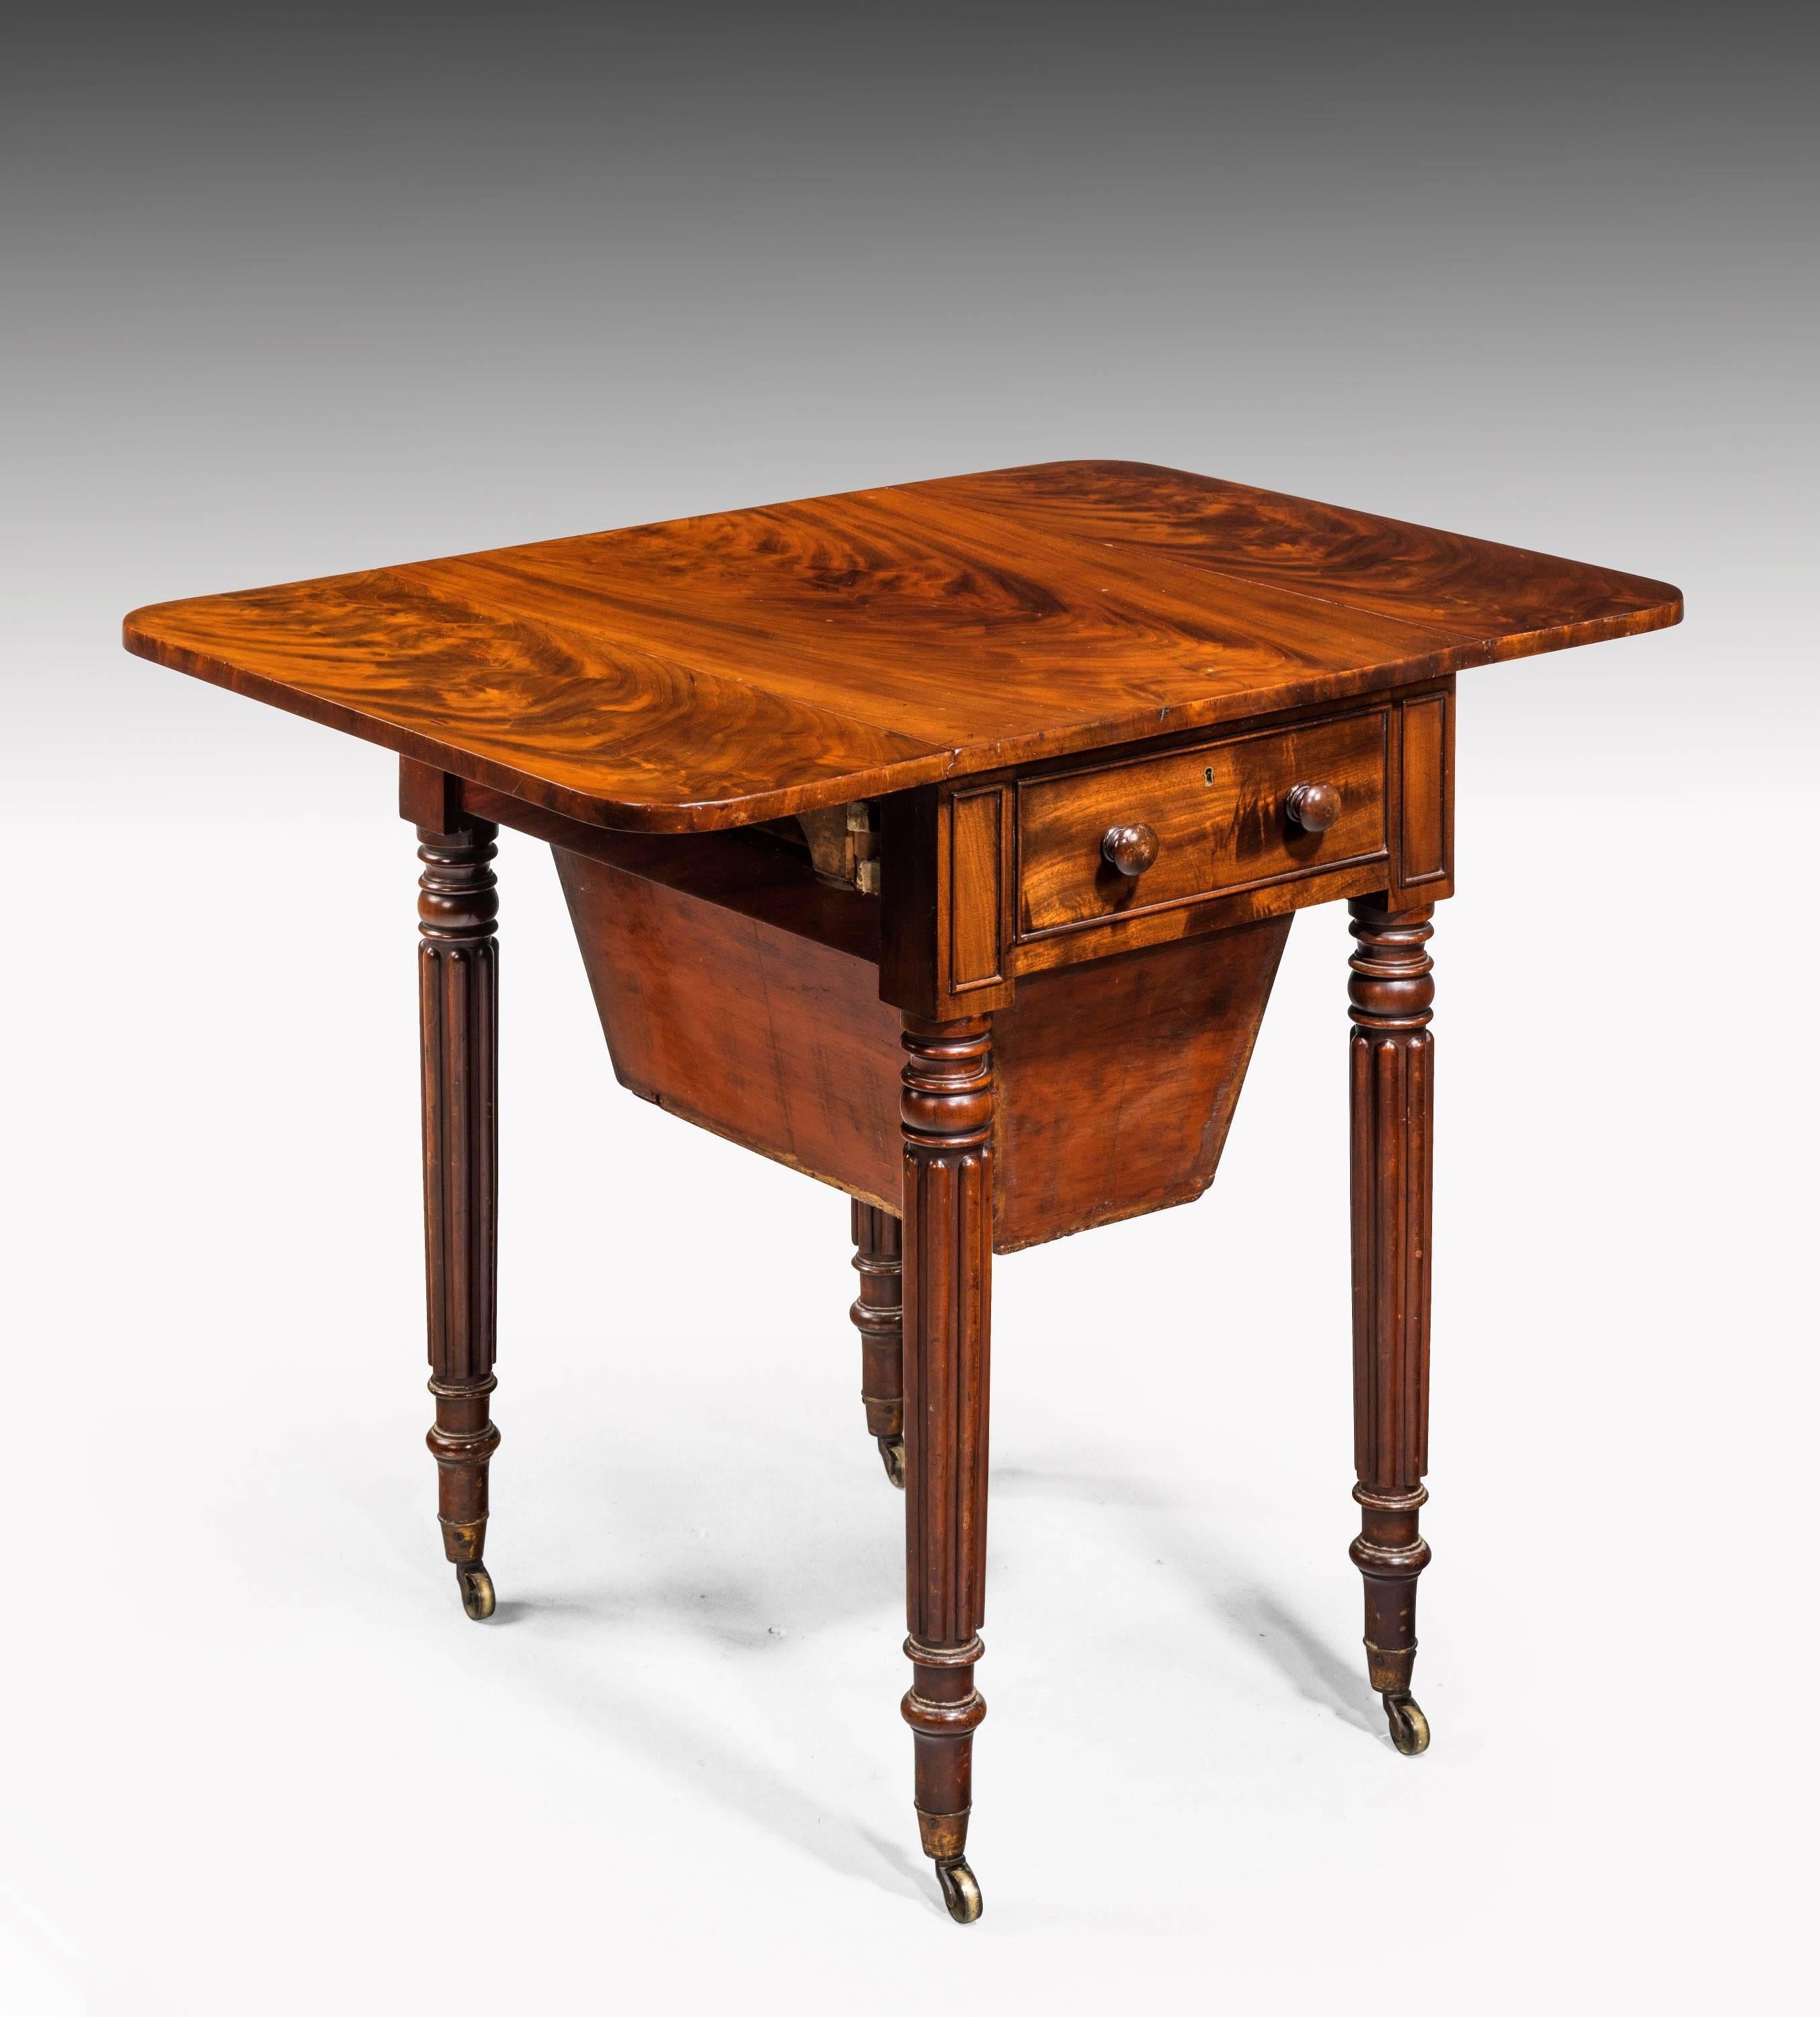 Regency Period Mahogany Pembroke Work Table with a Sewing Basket In Excellent Condition In Peterborough, Northamptonshire